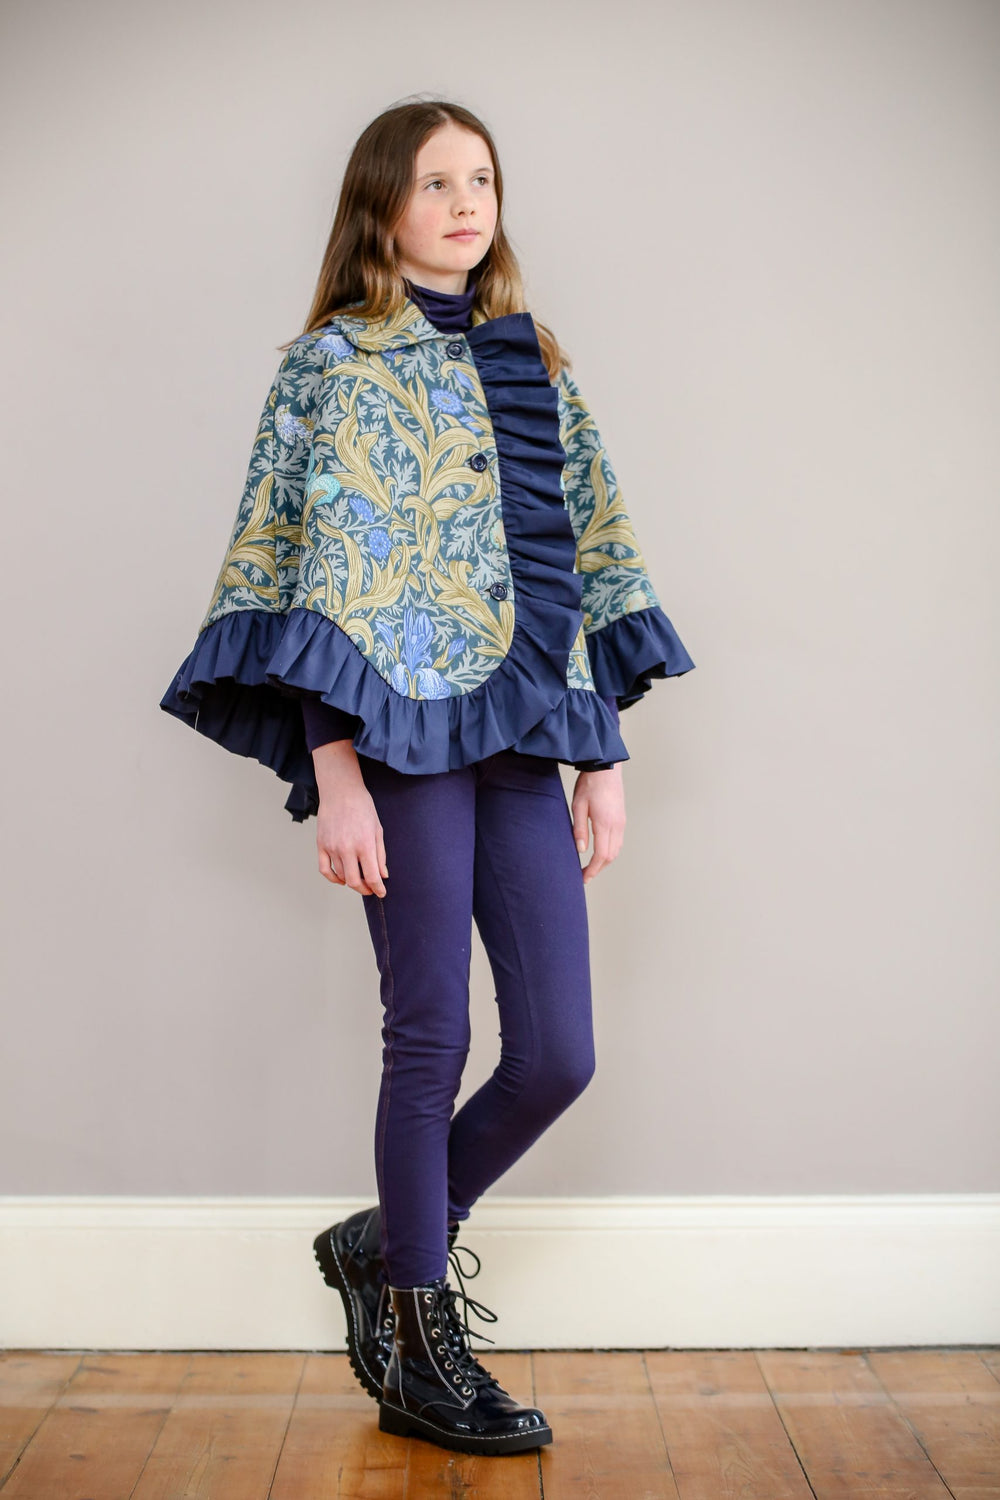 Child wearing the Children's Stornoway Cape sewing pattern by Greyfriars and Grace. A cape pattern made in mid-heavy weight wool, cotton, linen or cotton/linen blend fabric for cape and cotton lining, featuring a front button closure, collar and ruffle he